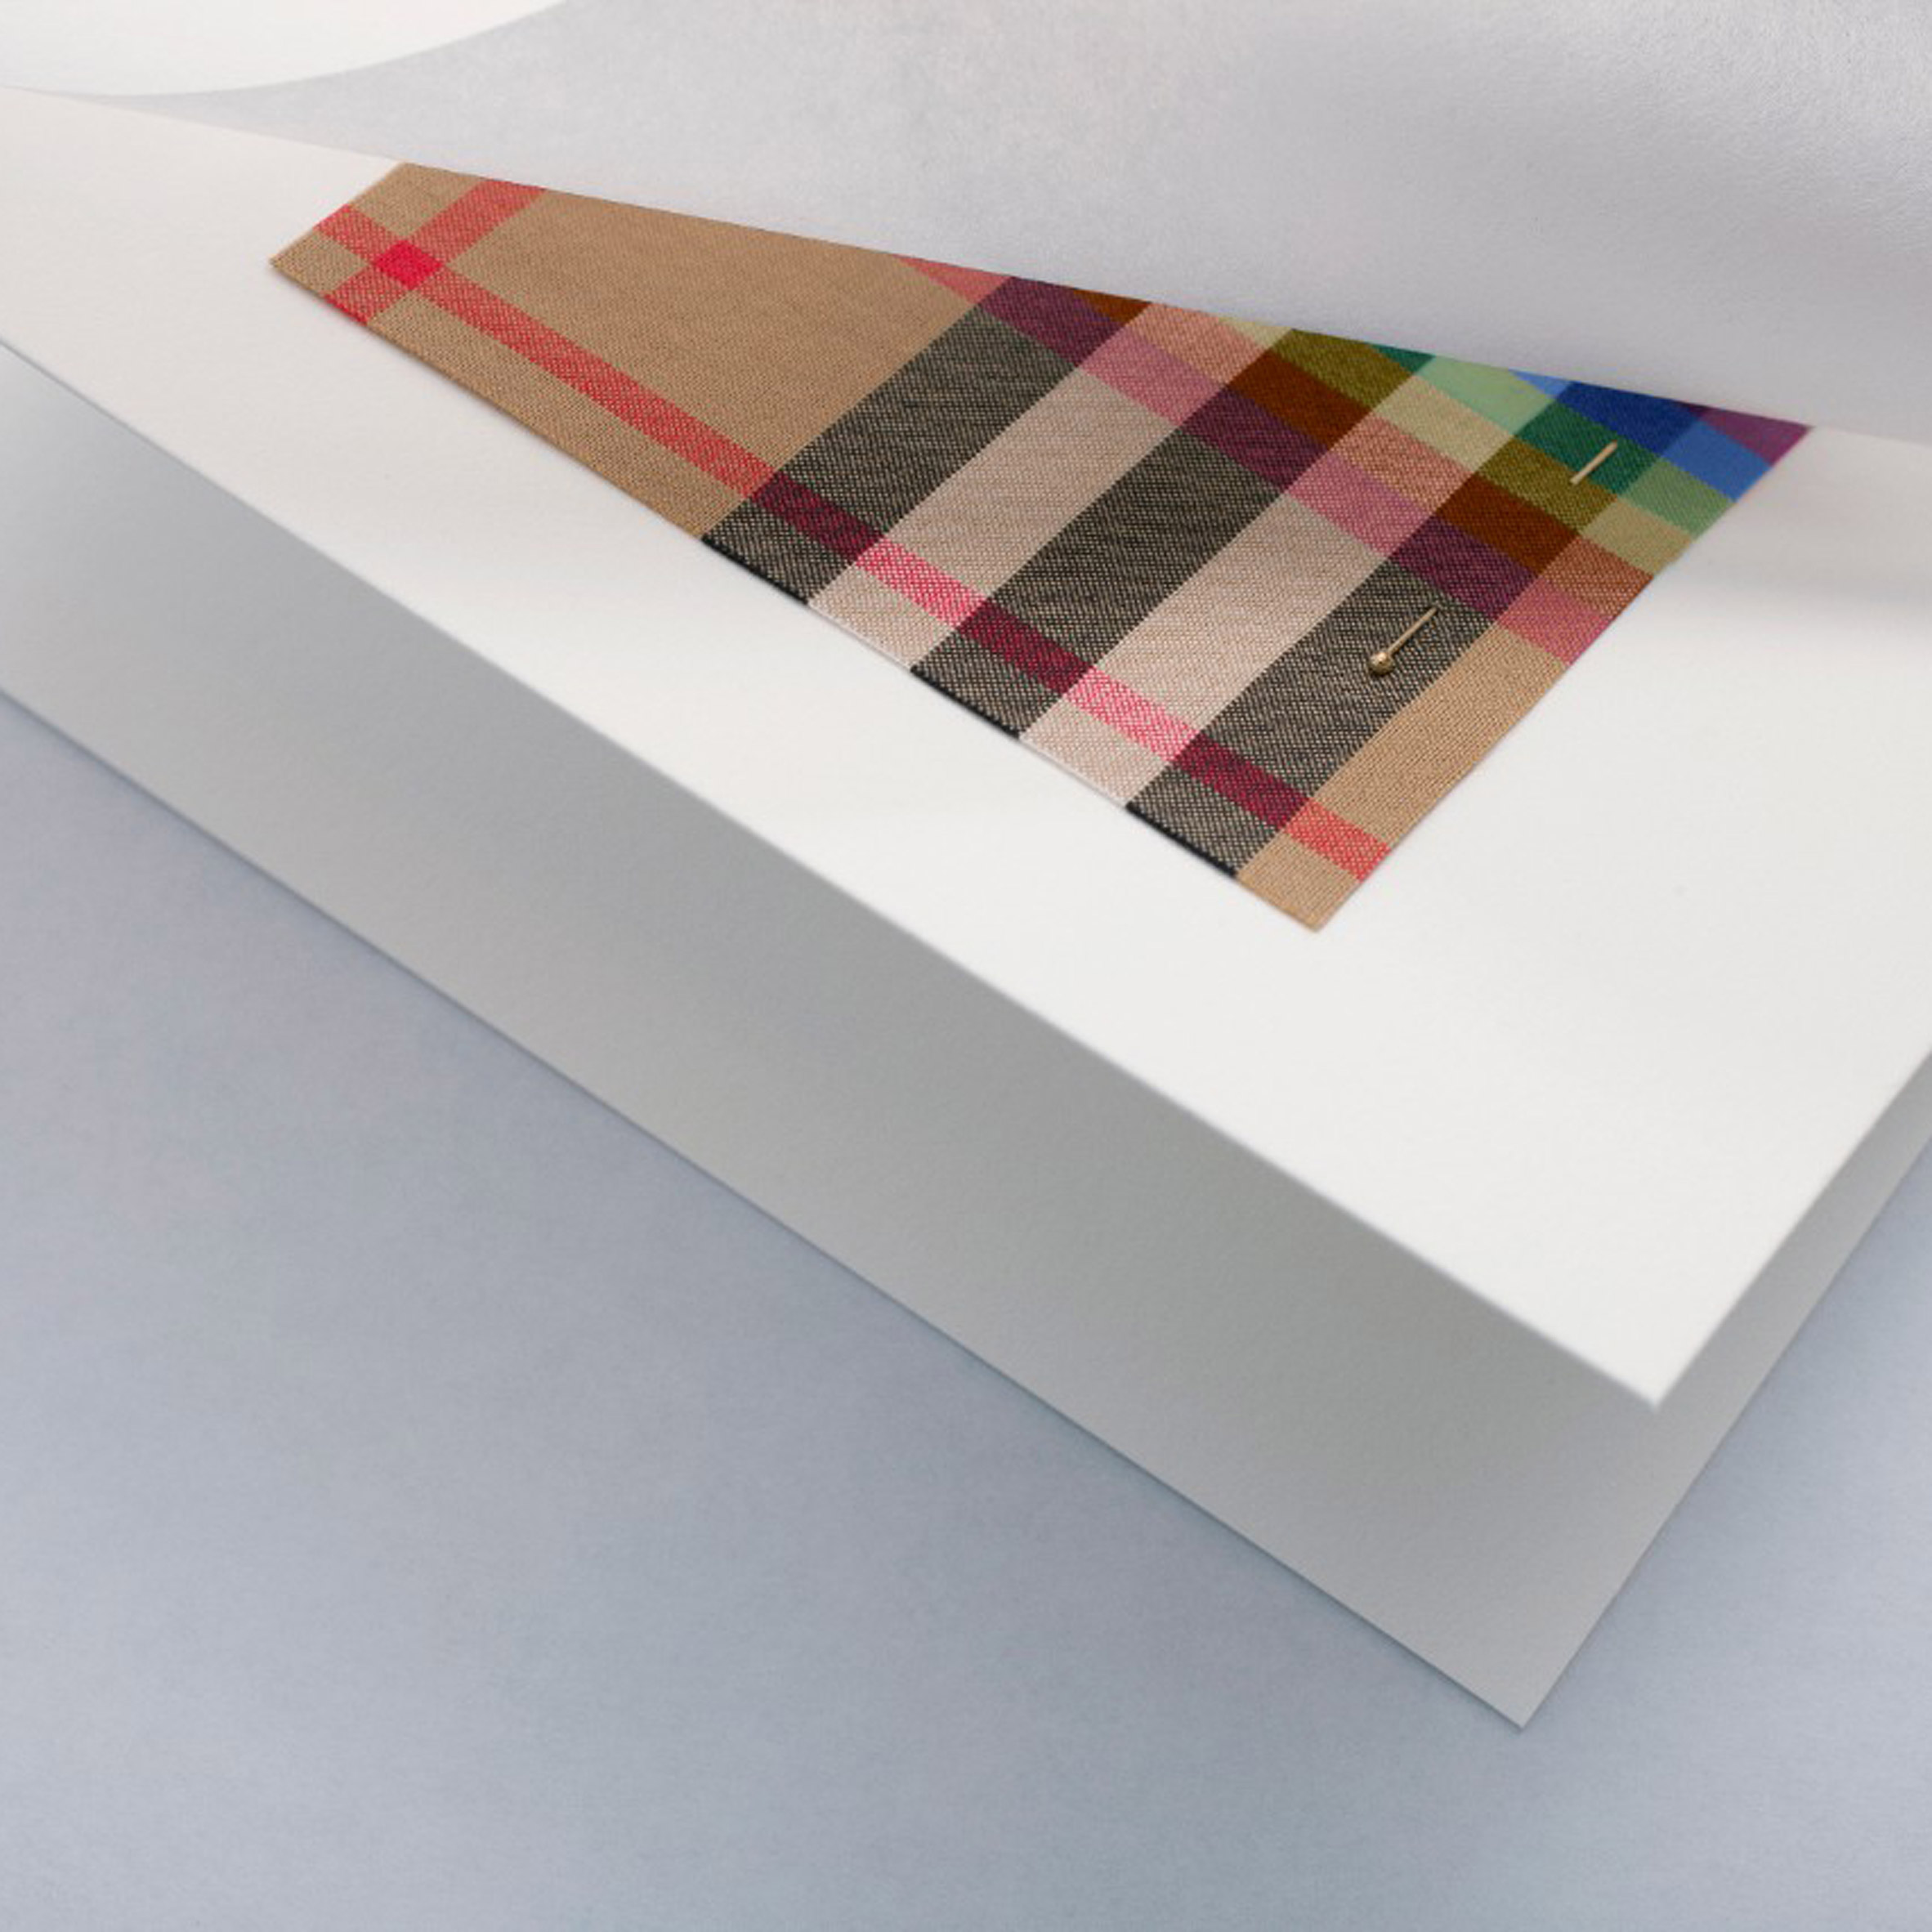 Betydning krise aIDS Burberry creates a rainbow tartan in support of LGBT charities